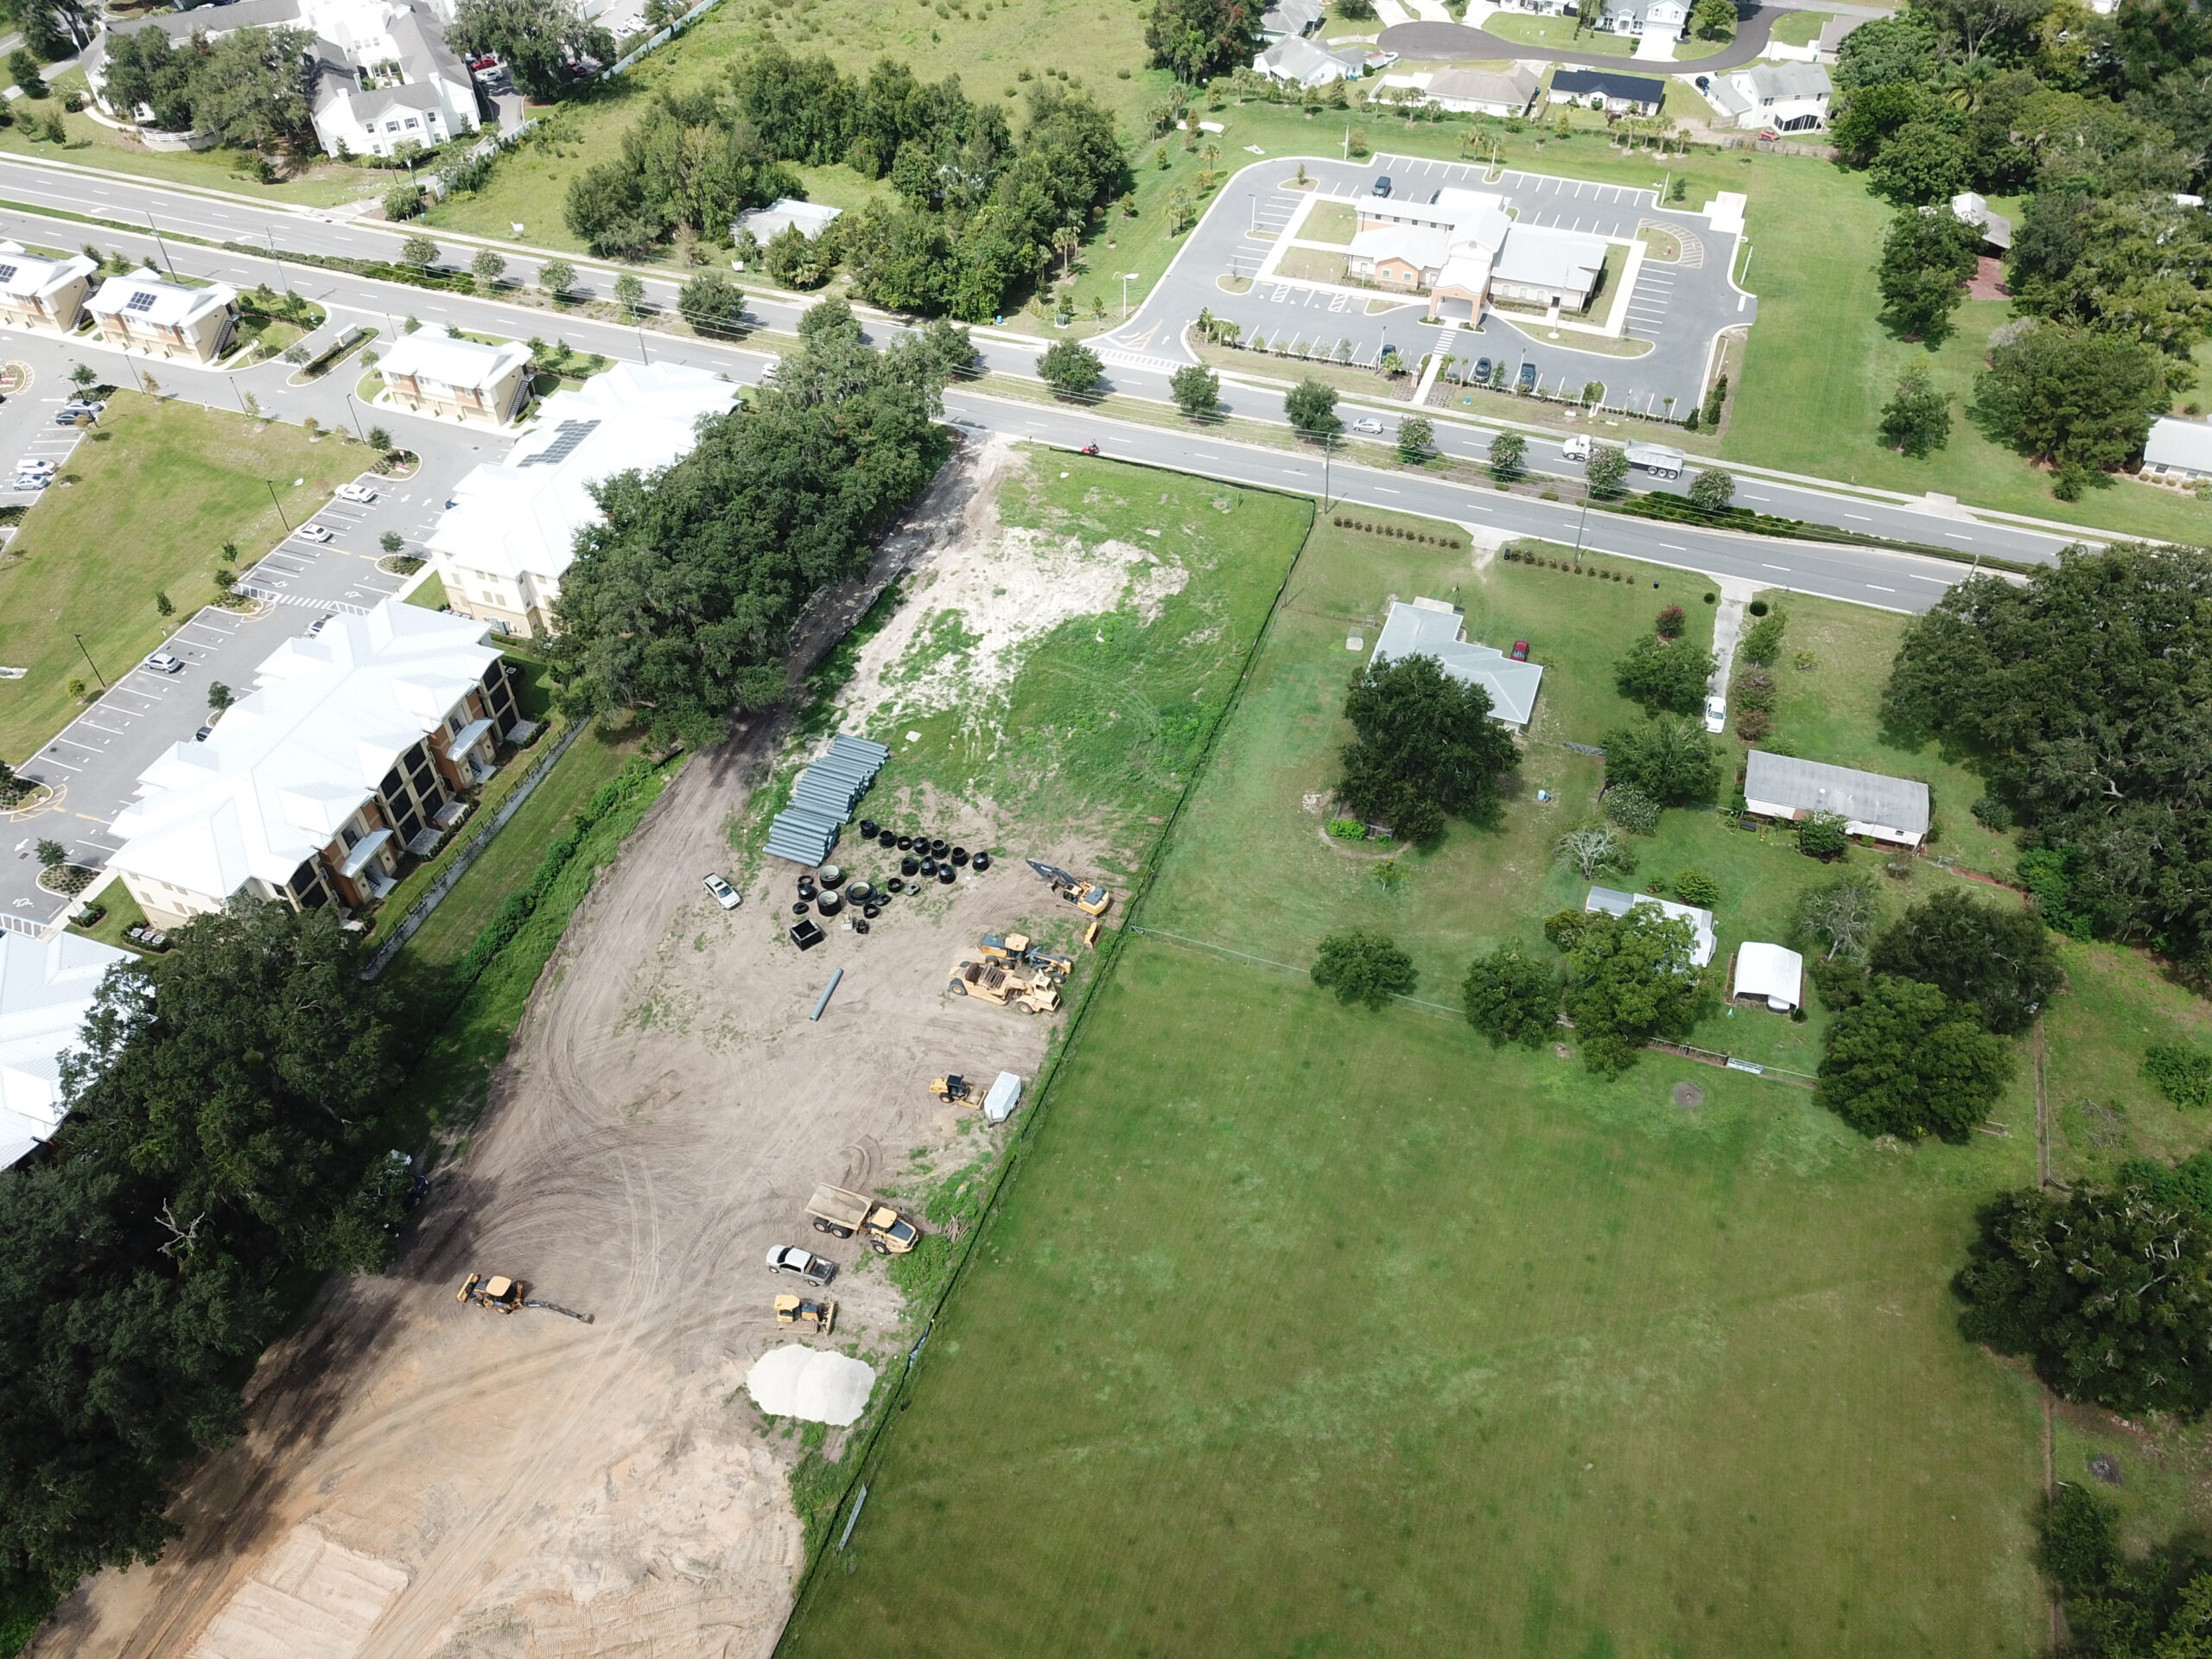 Townhomes at Powell and Storage, Wildwood FL – Under Construction